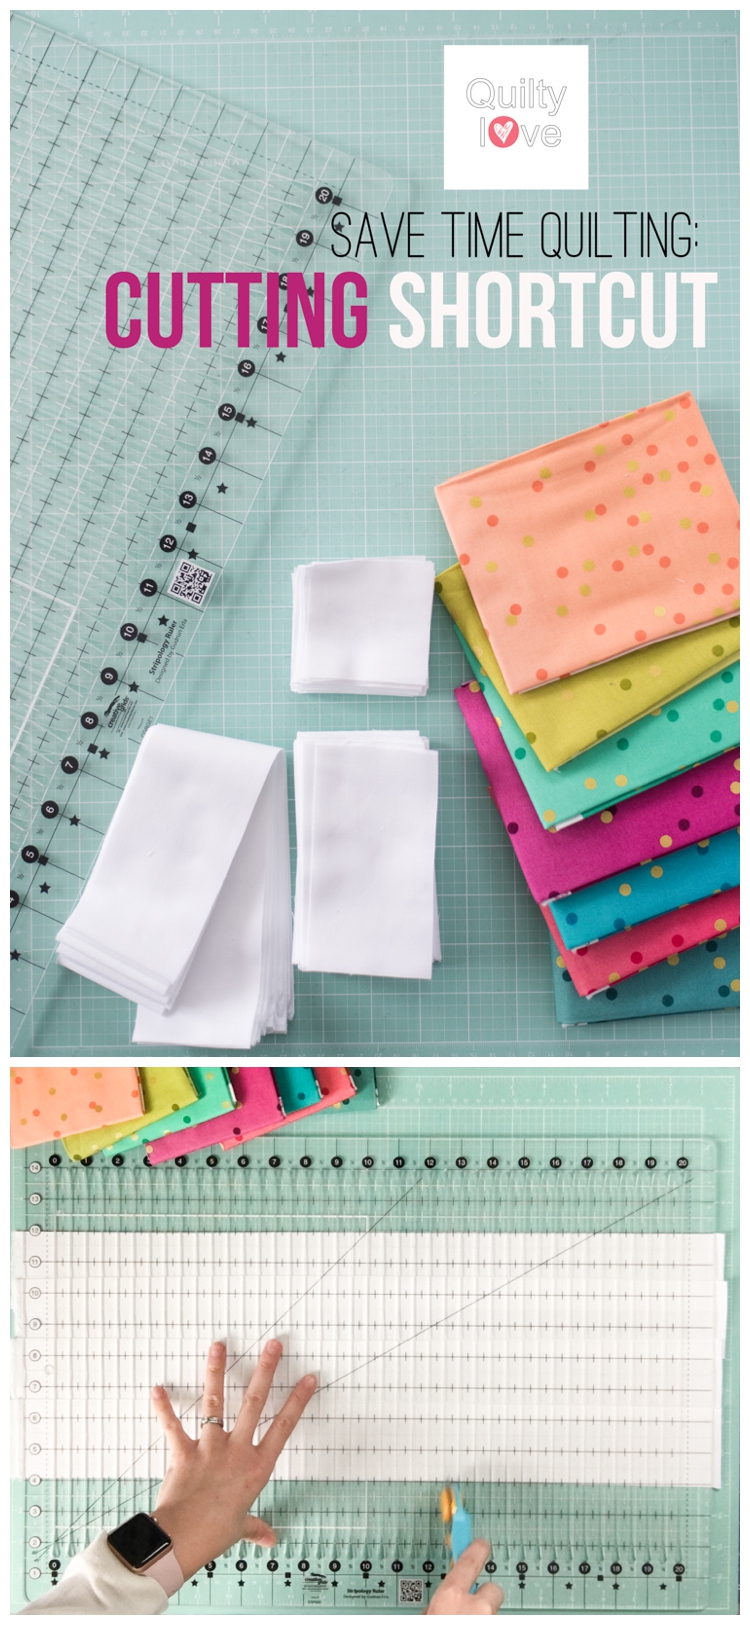 Save time quilting with this cutting shortcut